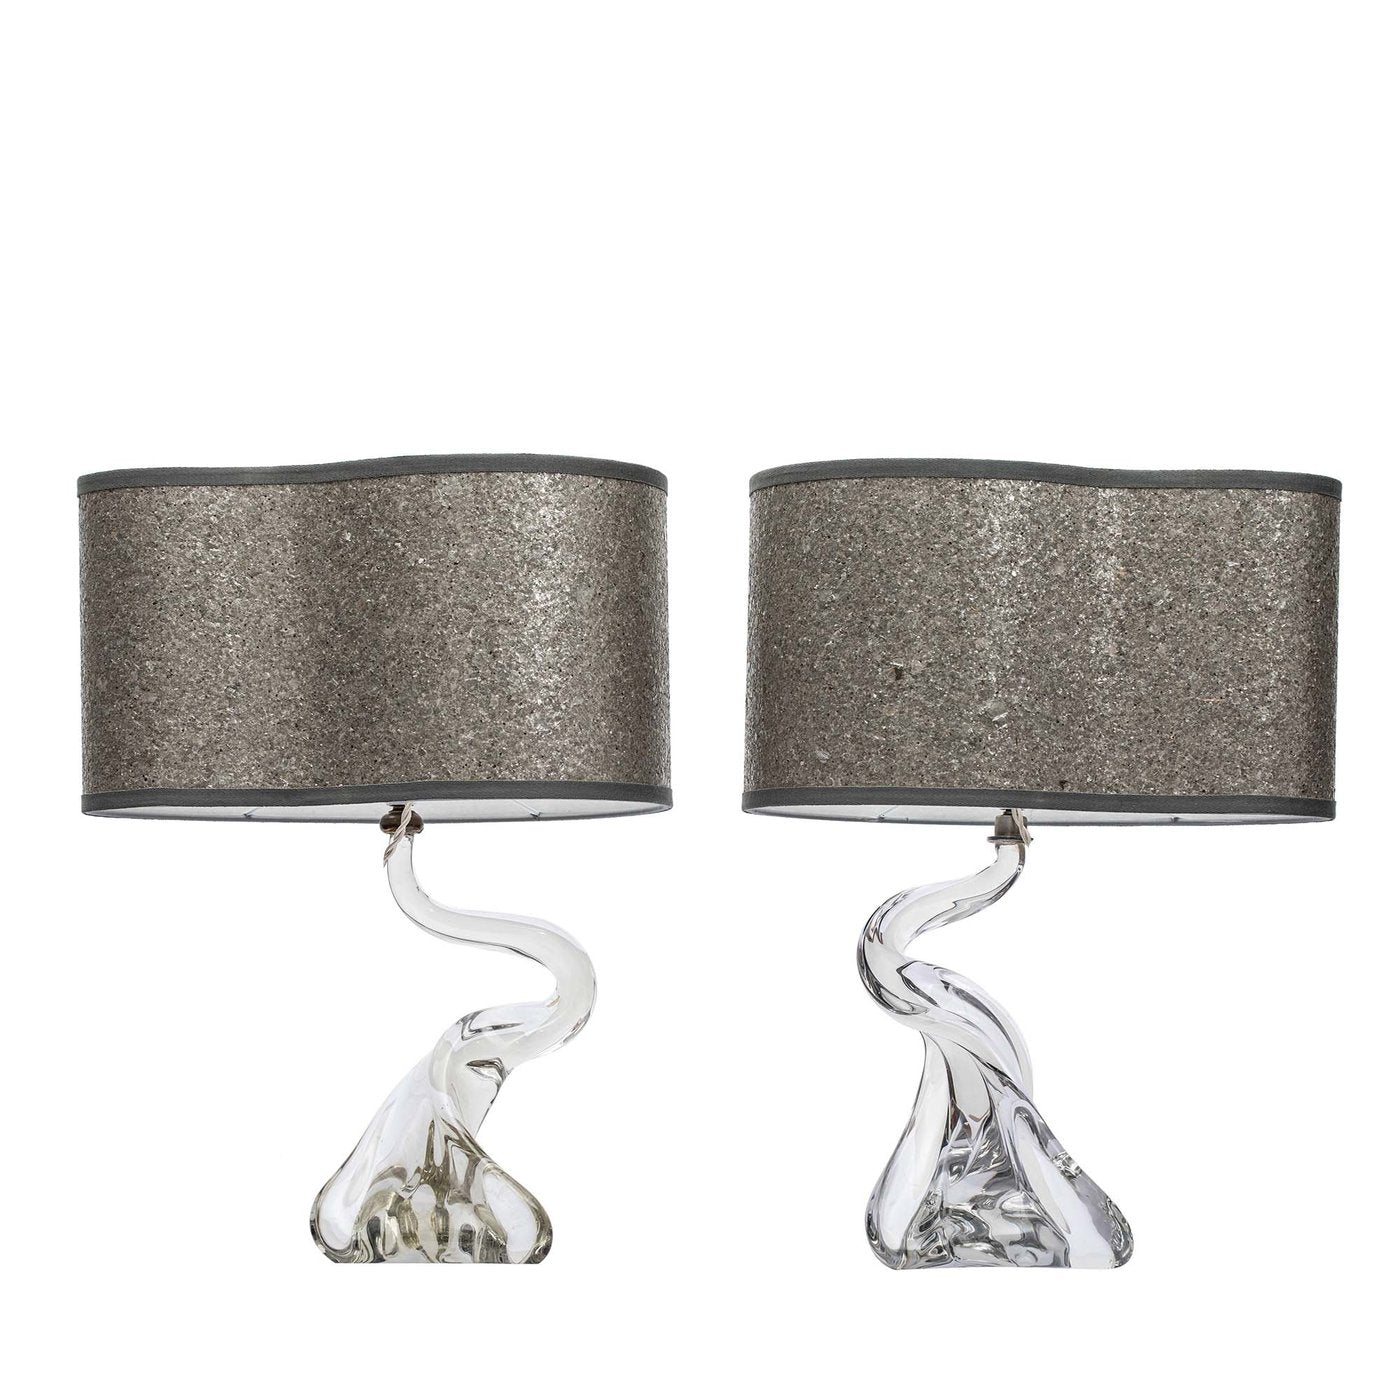 Set of 2 Crystal Table Lamps - Main view